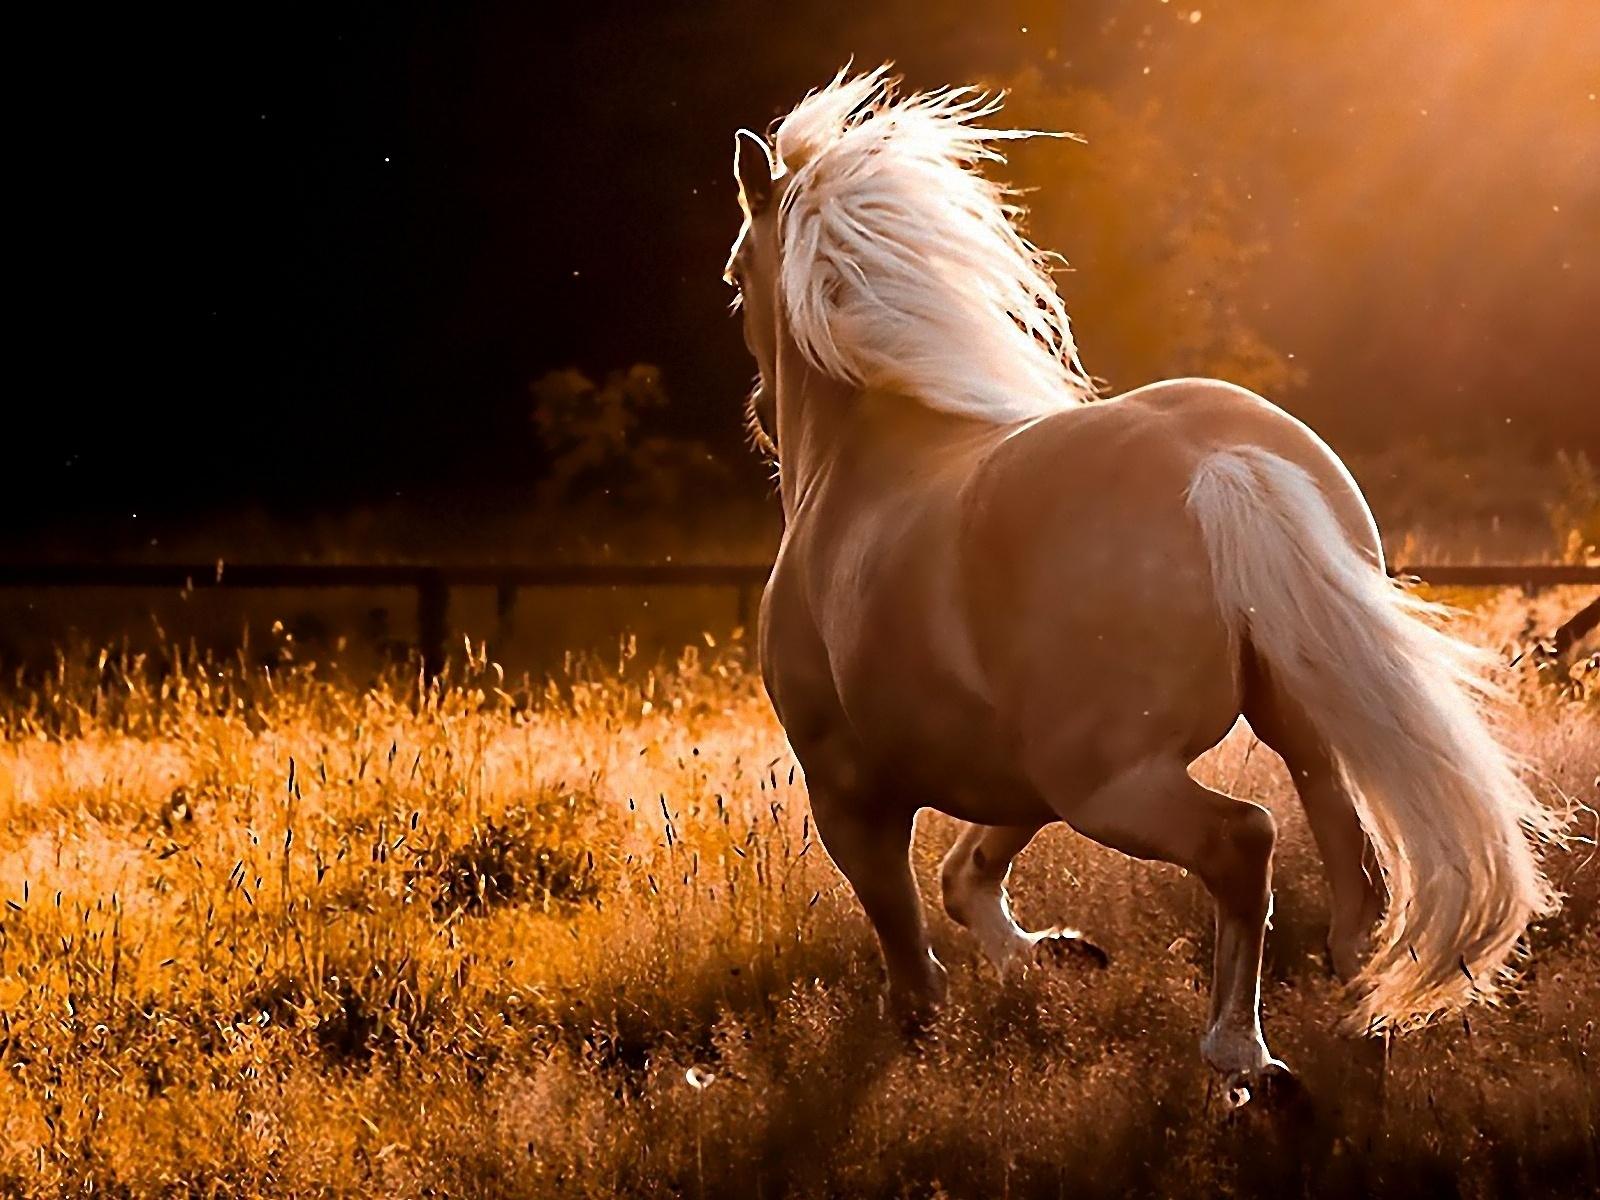 35 Most Beautiful Horse Pictures and Images